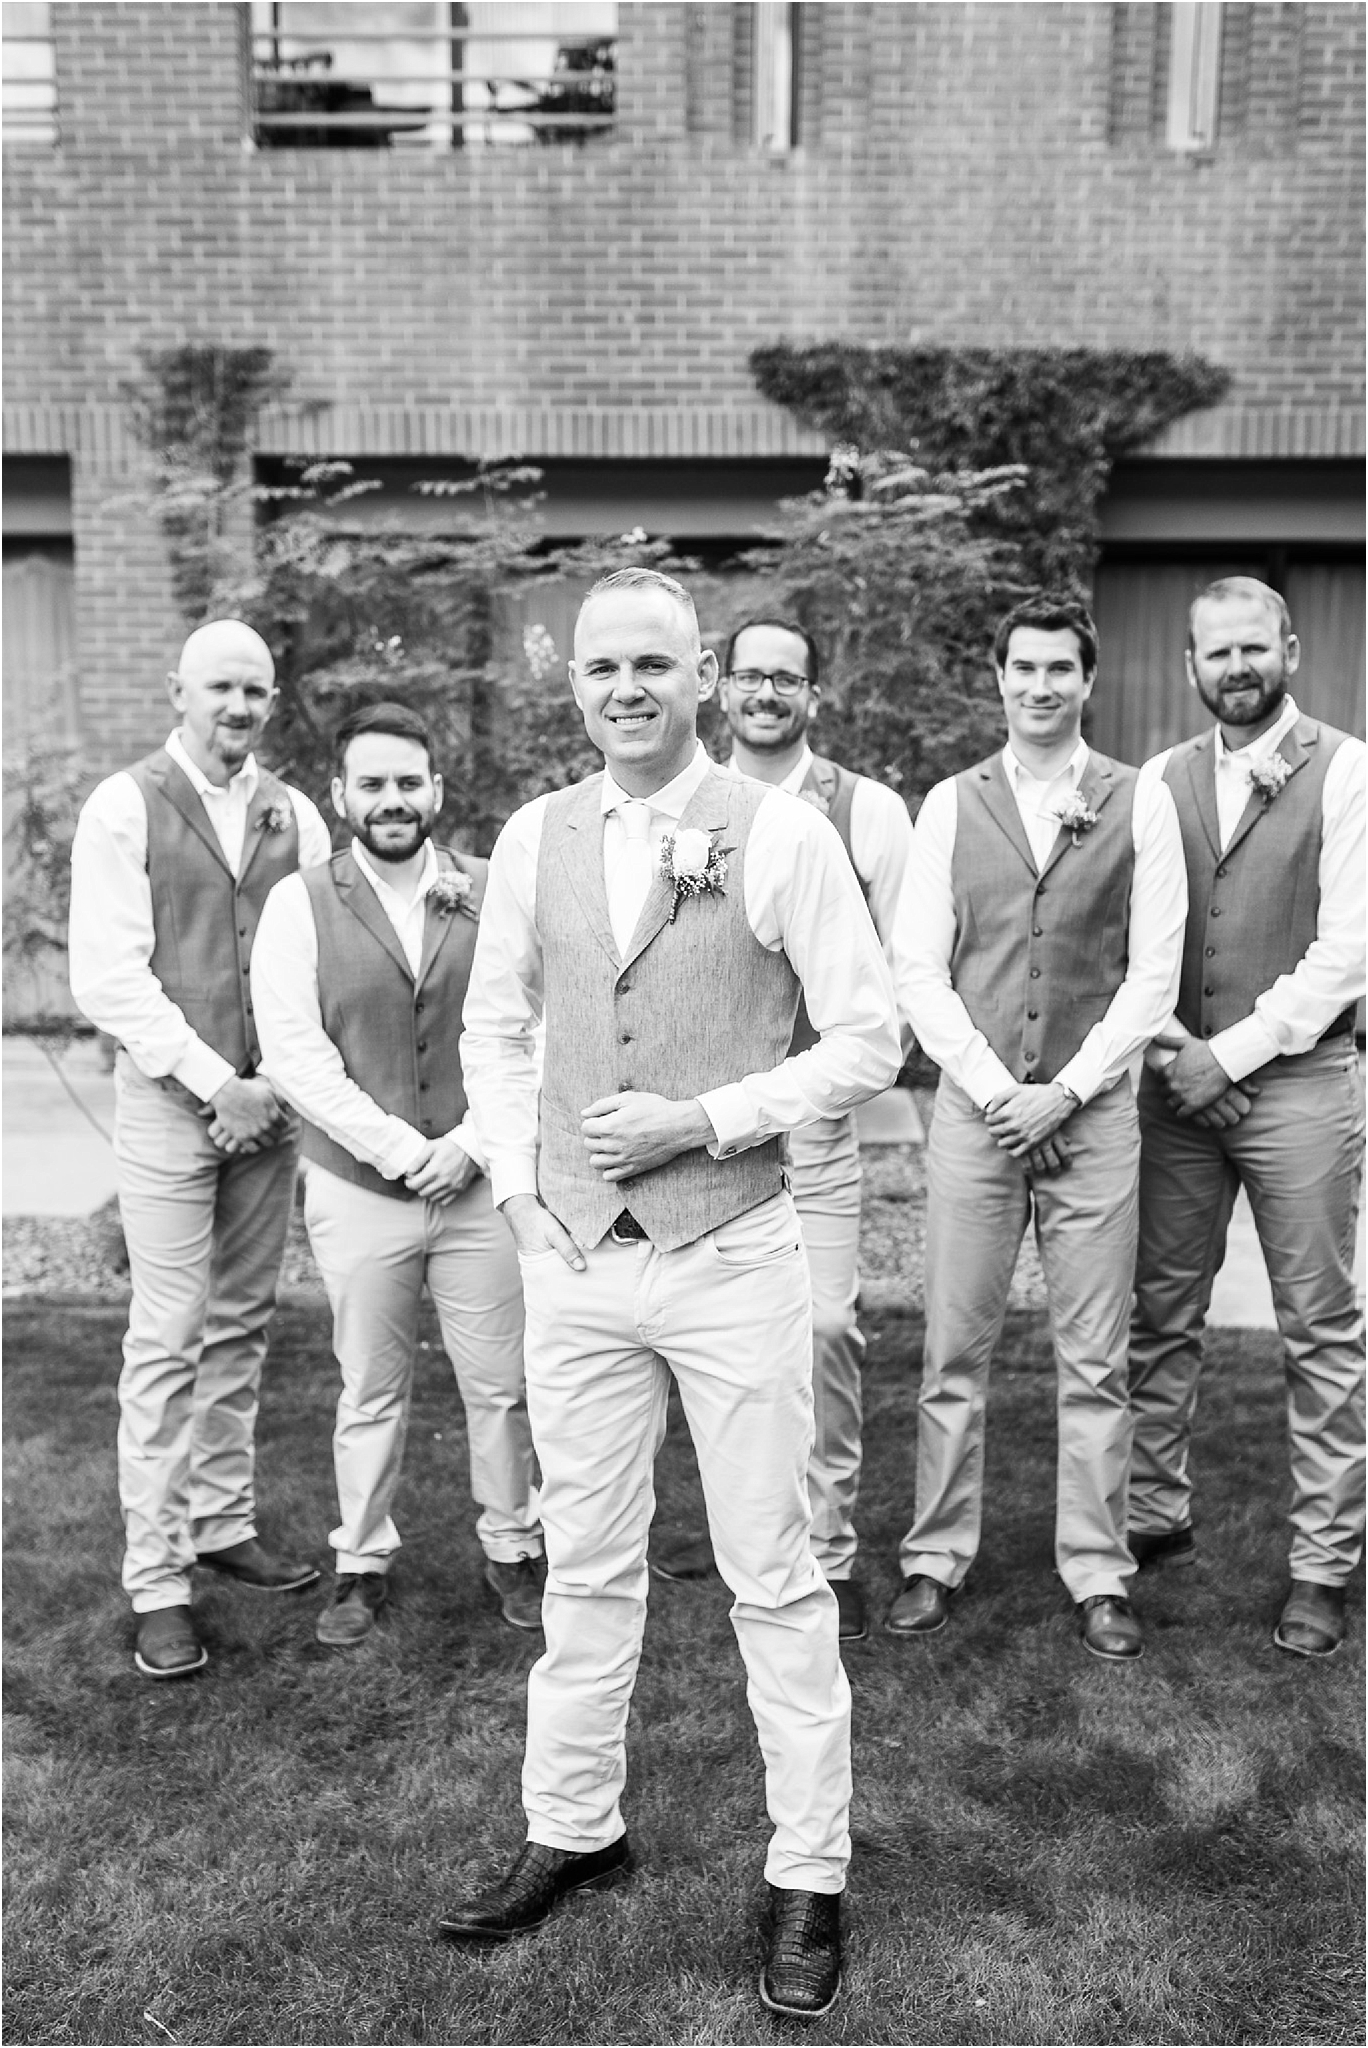 The Lodge at Ventana Canyon black and white wedding photo of groom with groomsmen